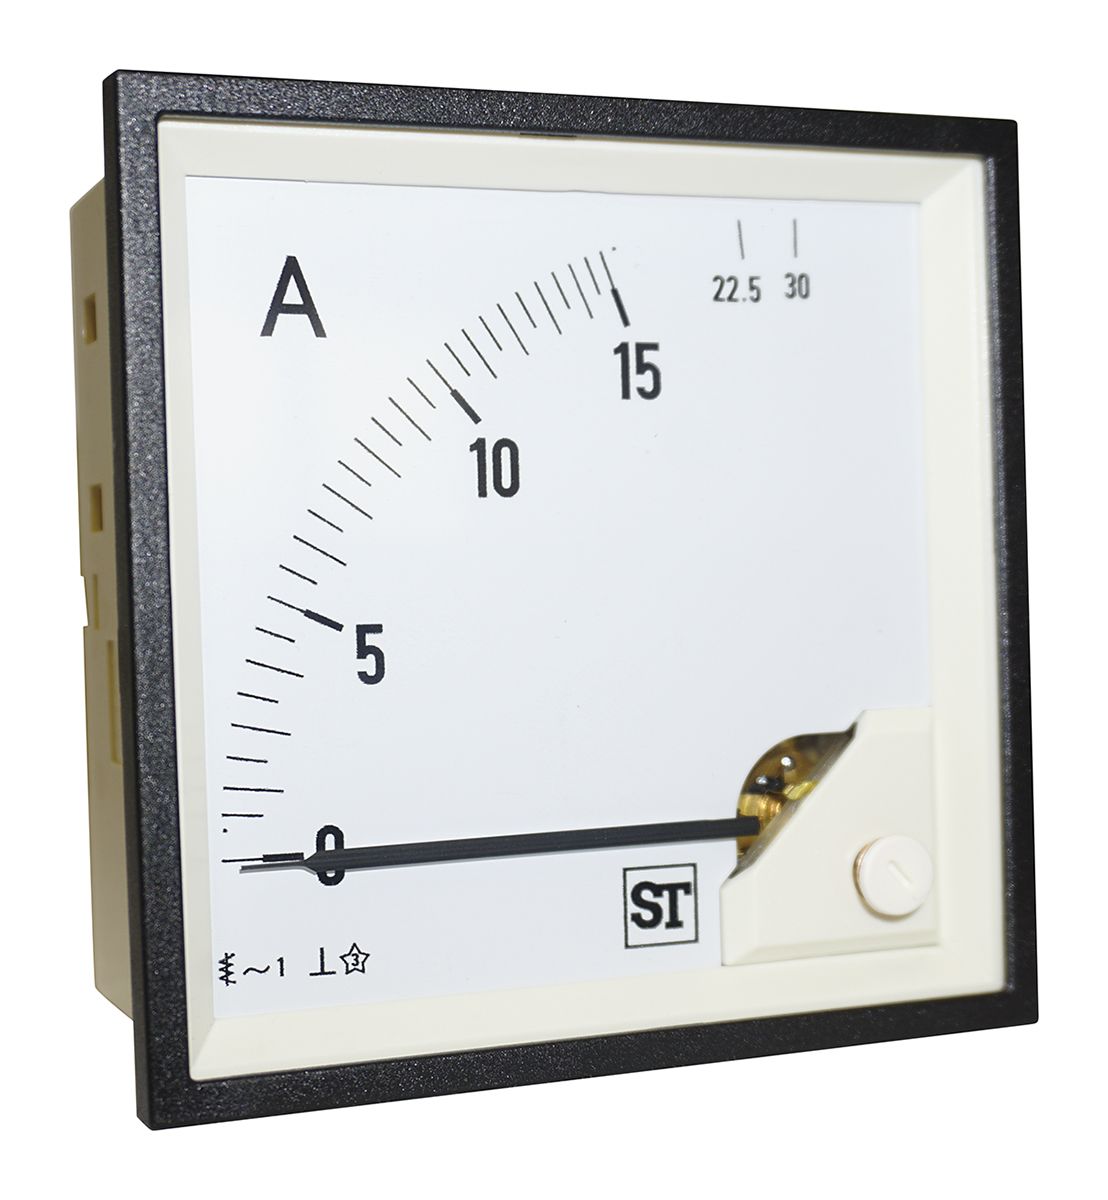 Sifam Tinsley Sigma Analogue Panel Ammeter 15A AC, 92mm x 92mm Moving Iron